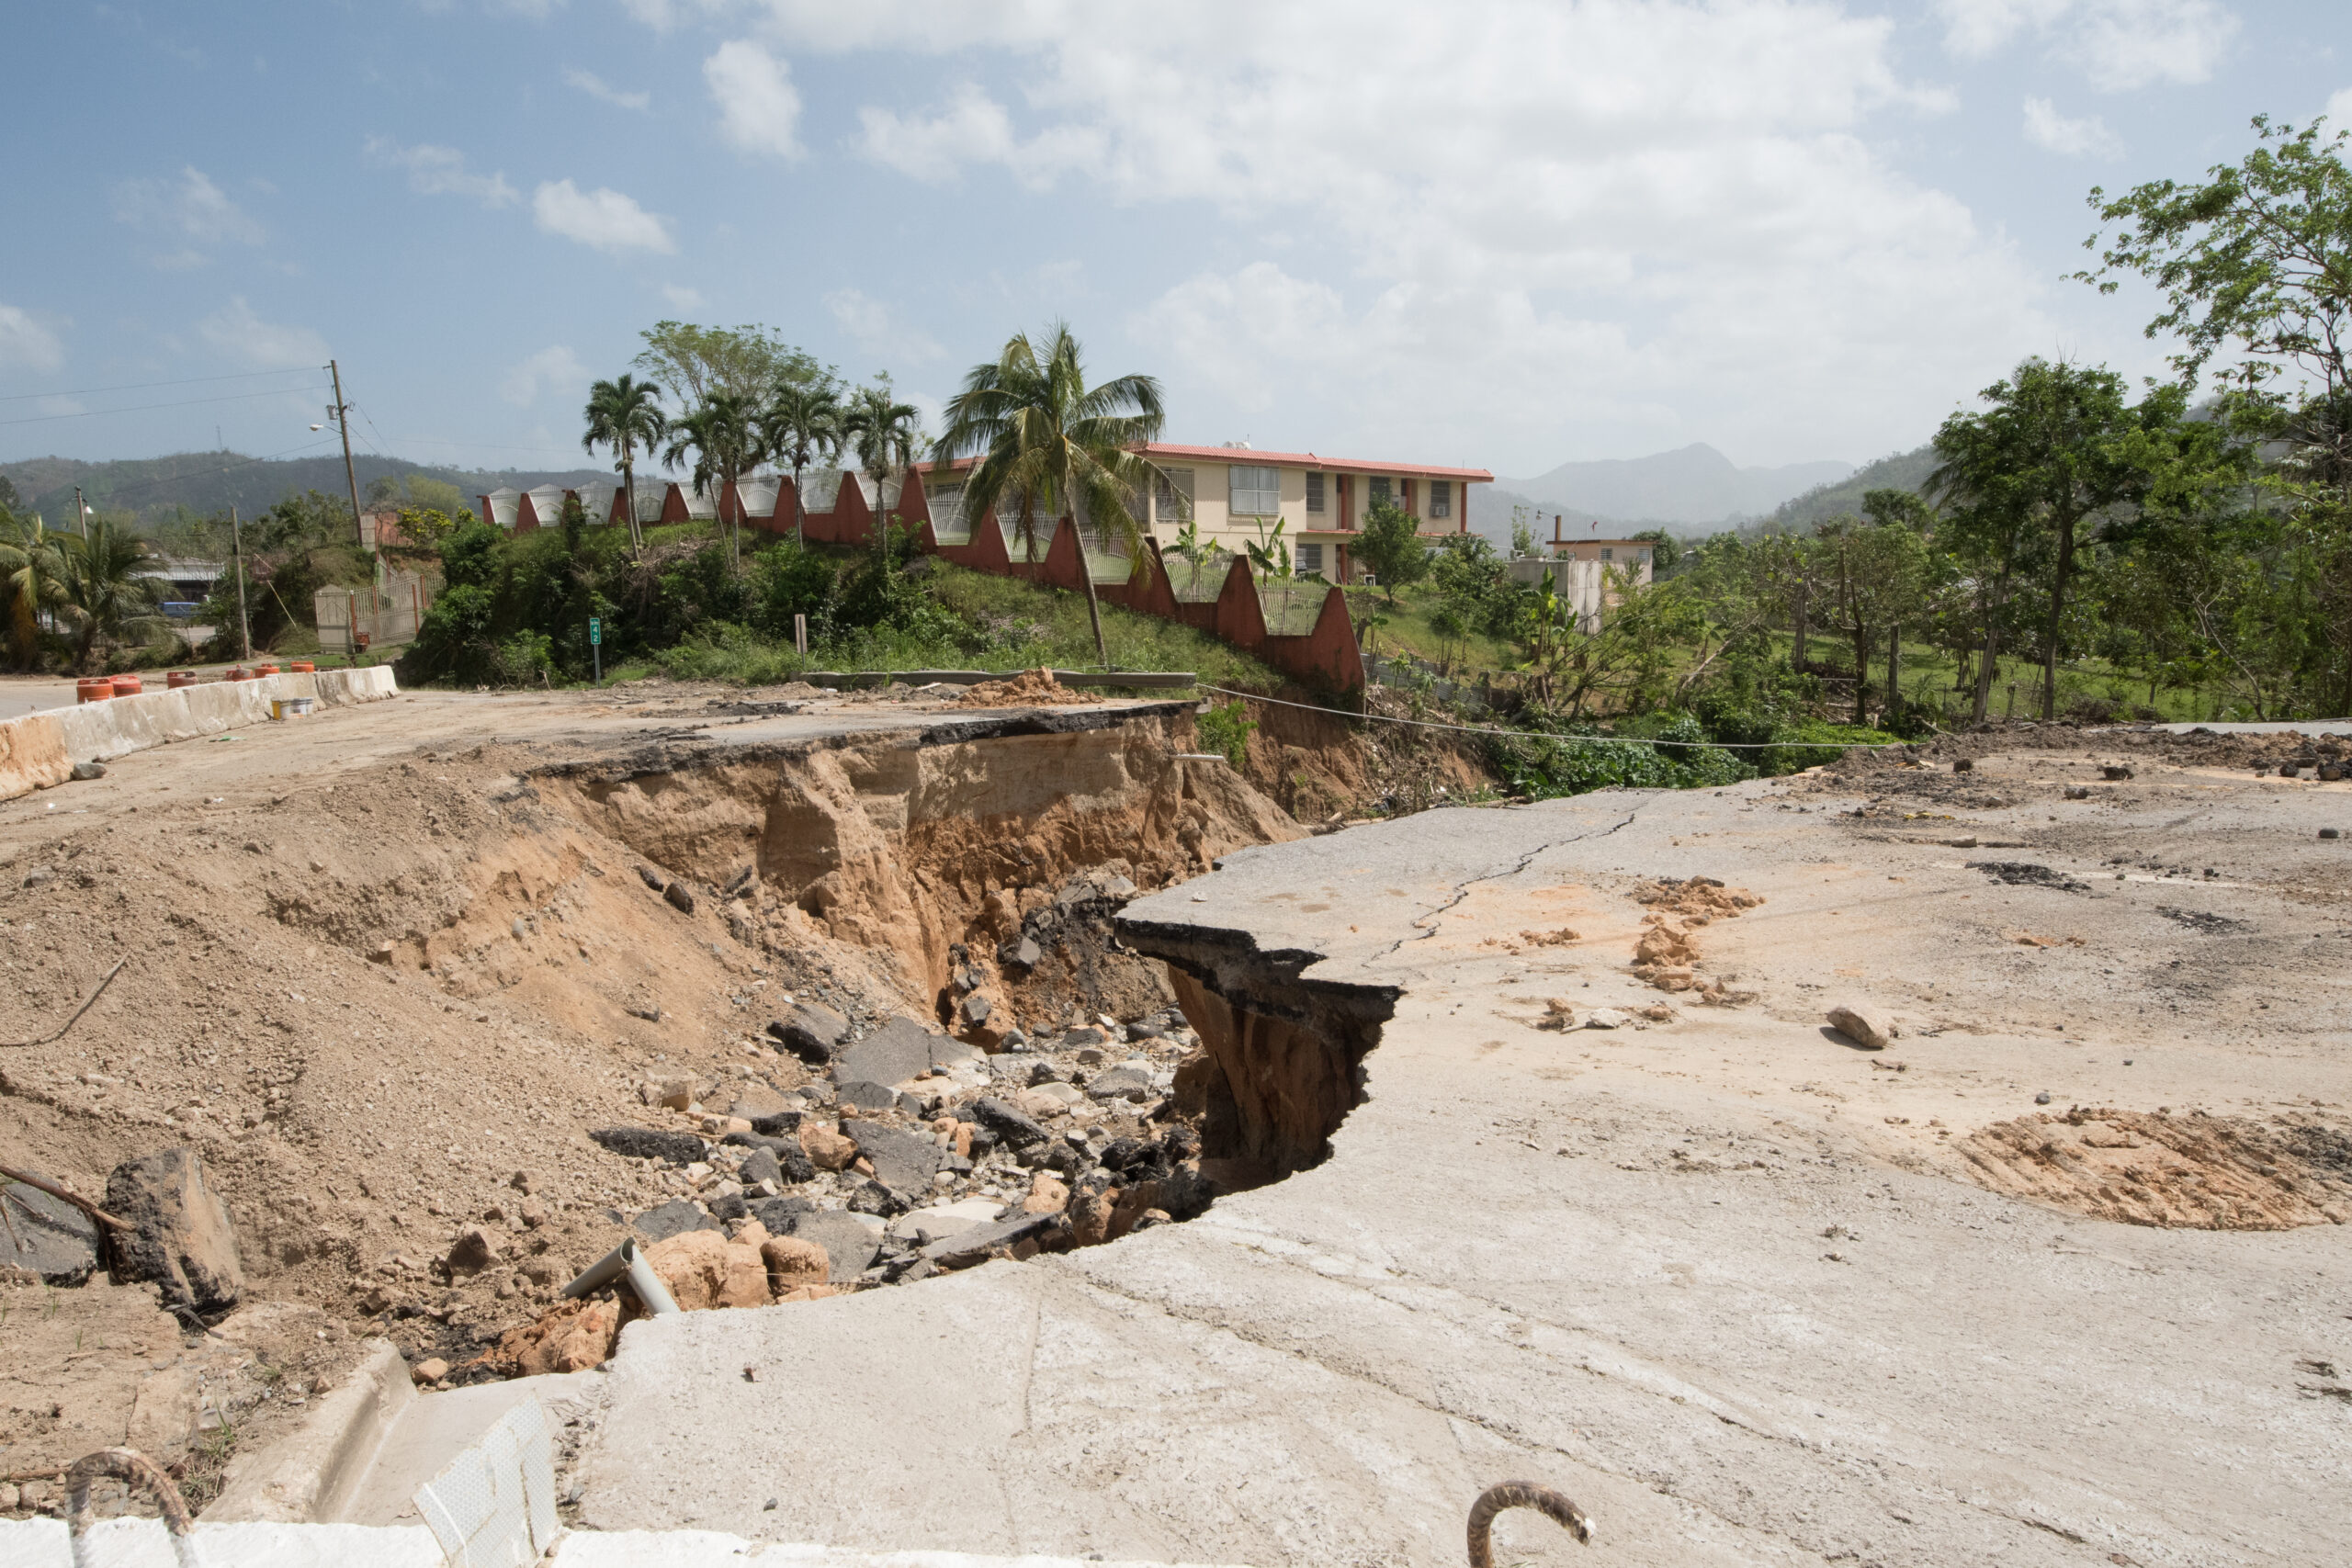 How does tsunamis affect the environment? Many roads were destroyed by Hurricane Maria in September, 2017 and by the resulting flooding and soil saturation. 